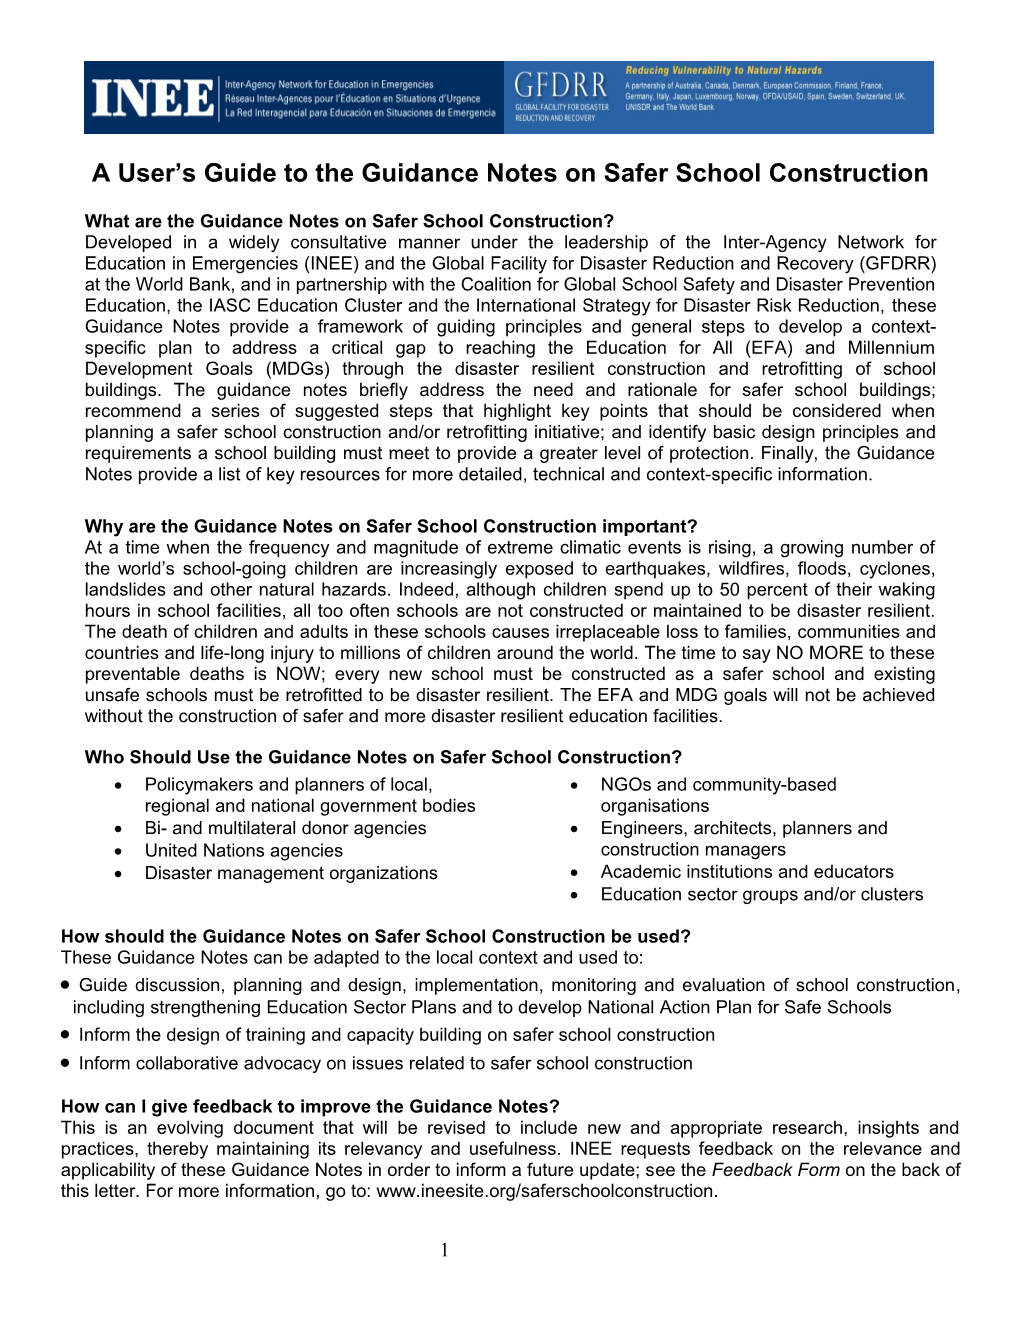 Developing INEE Guidance Notes on Teacher Compensation in Fragile States, Situations Of